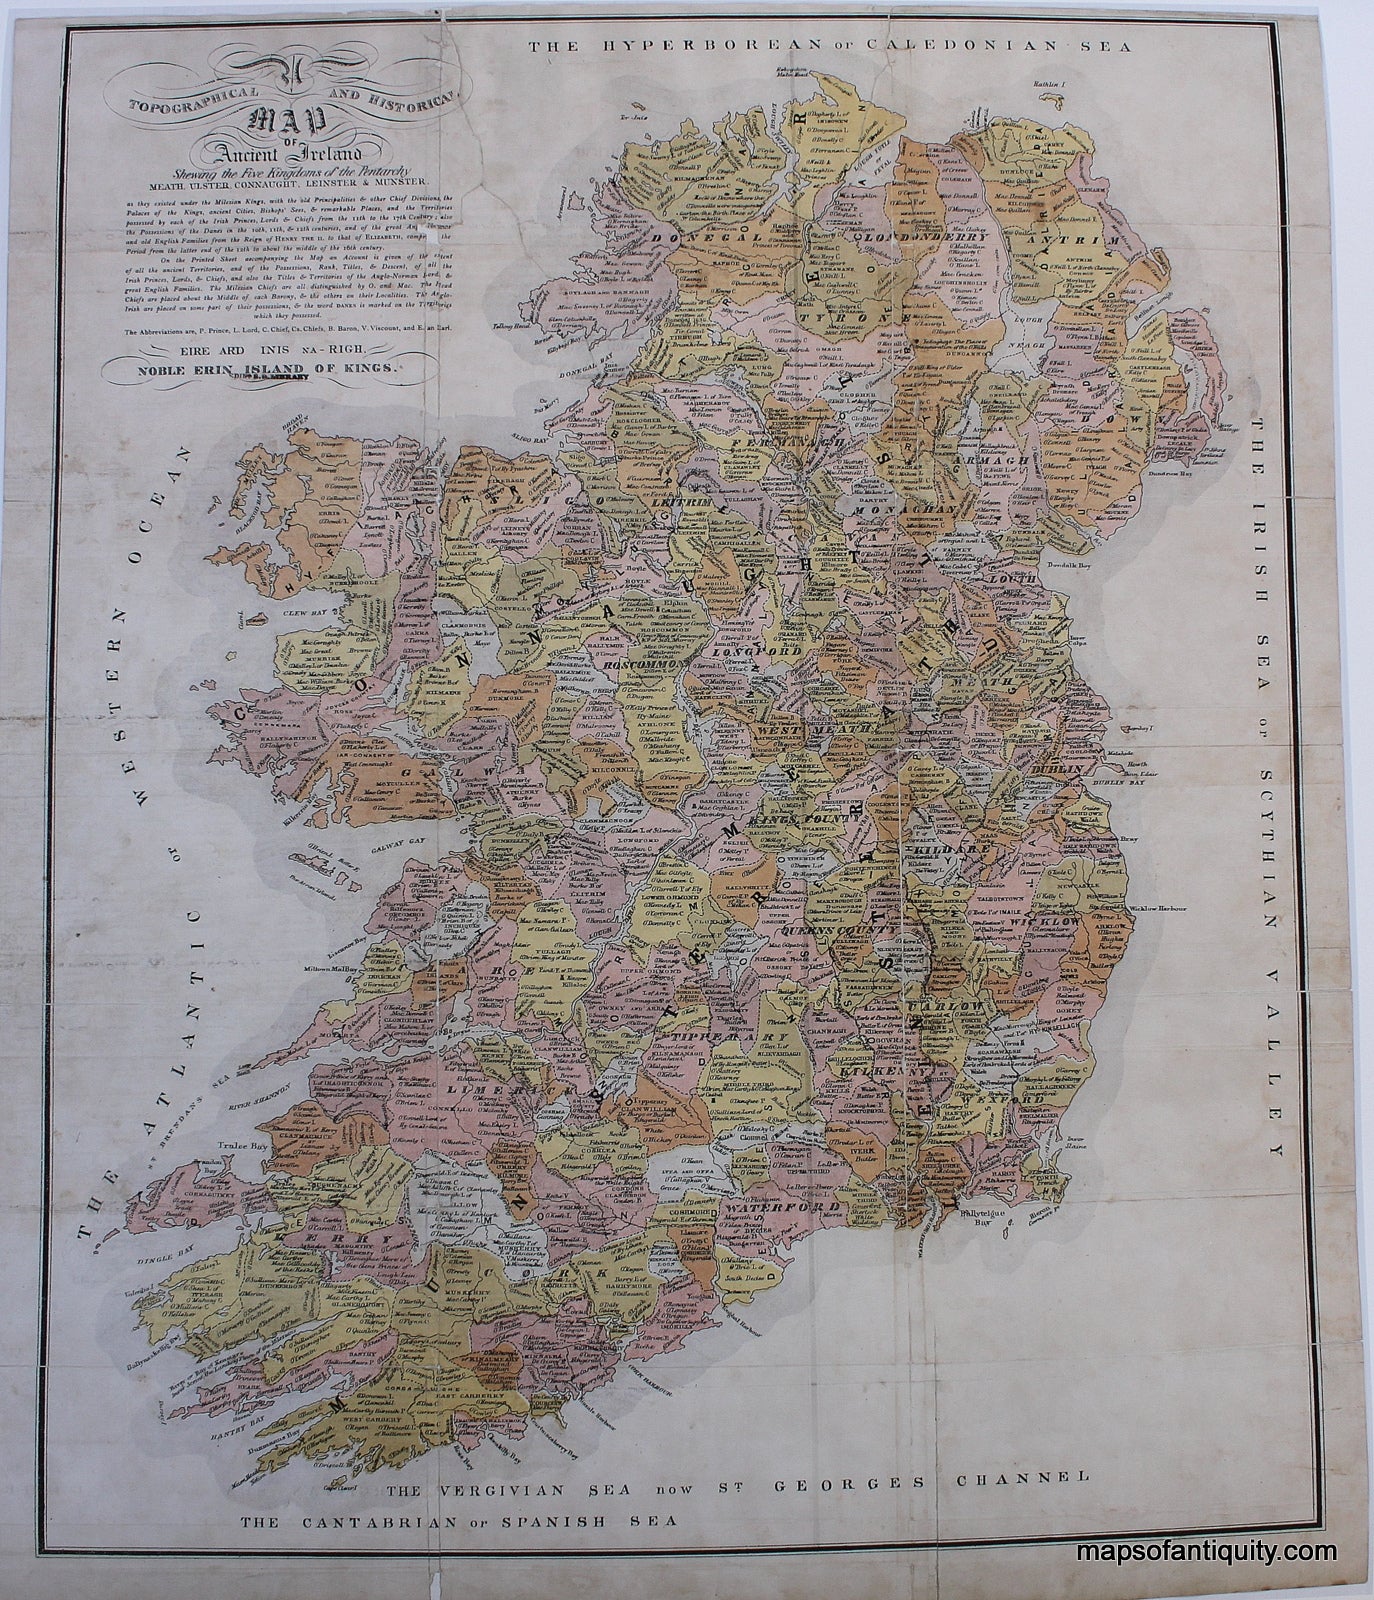 Clans-of-Ancient-Ireland-Print-Reproduction print of an antique map of Ireland showing the five kingdoms of the pentarchy with family names throughout. Topographical and Historical Map of Ancient Ireland